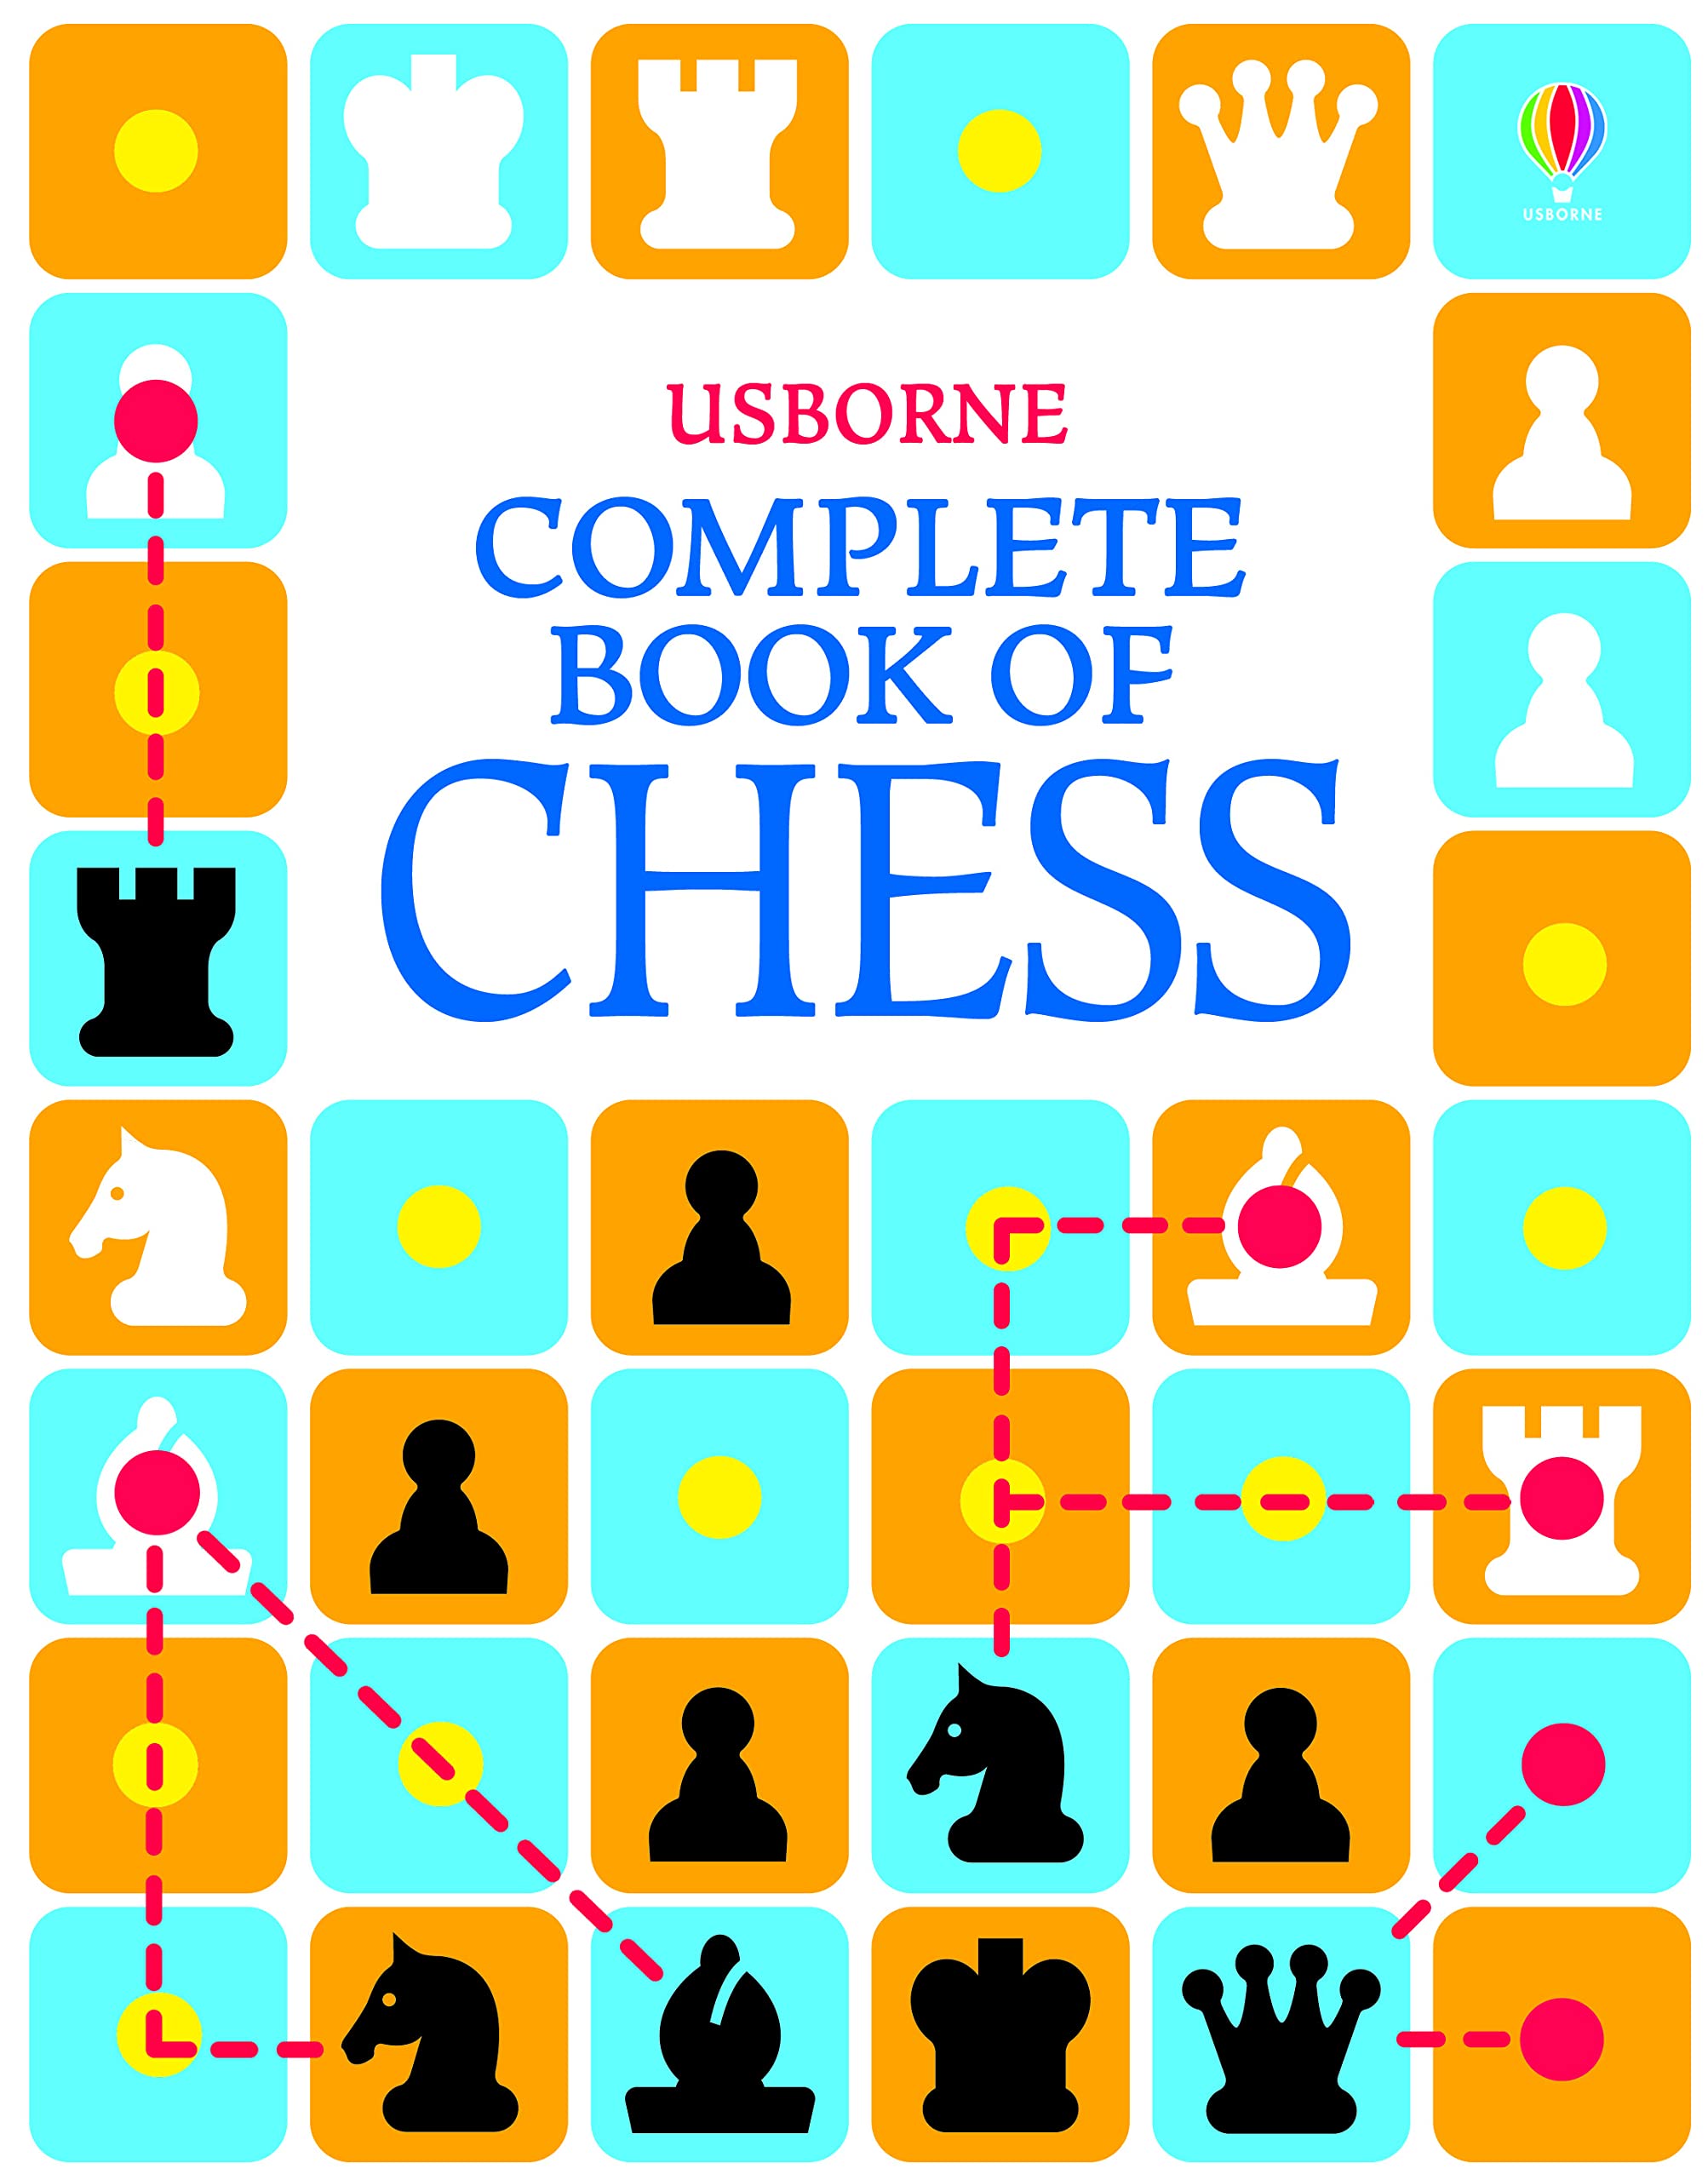 Complete Book of Chess